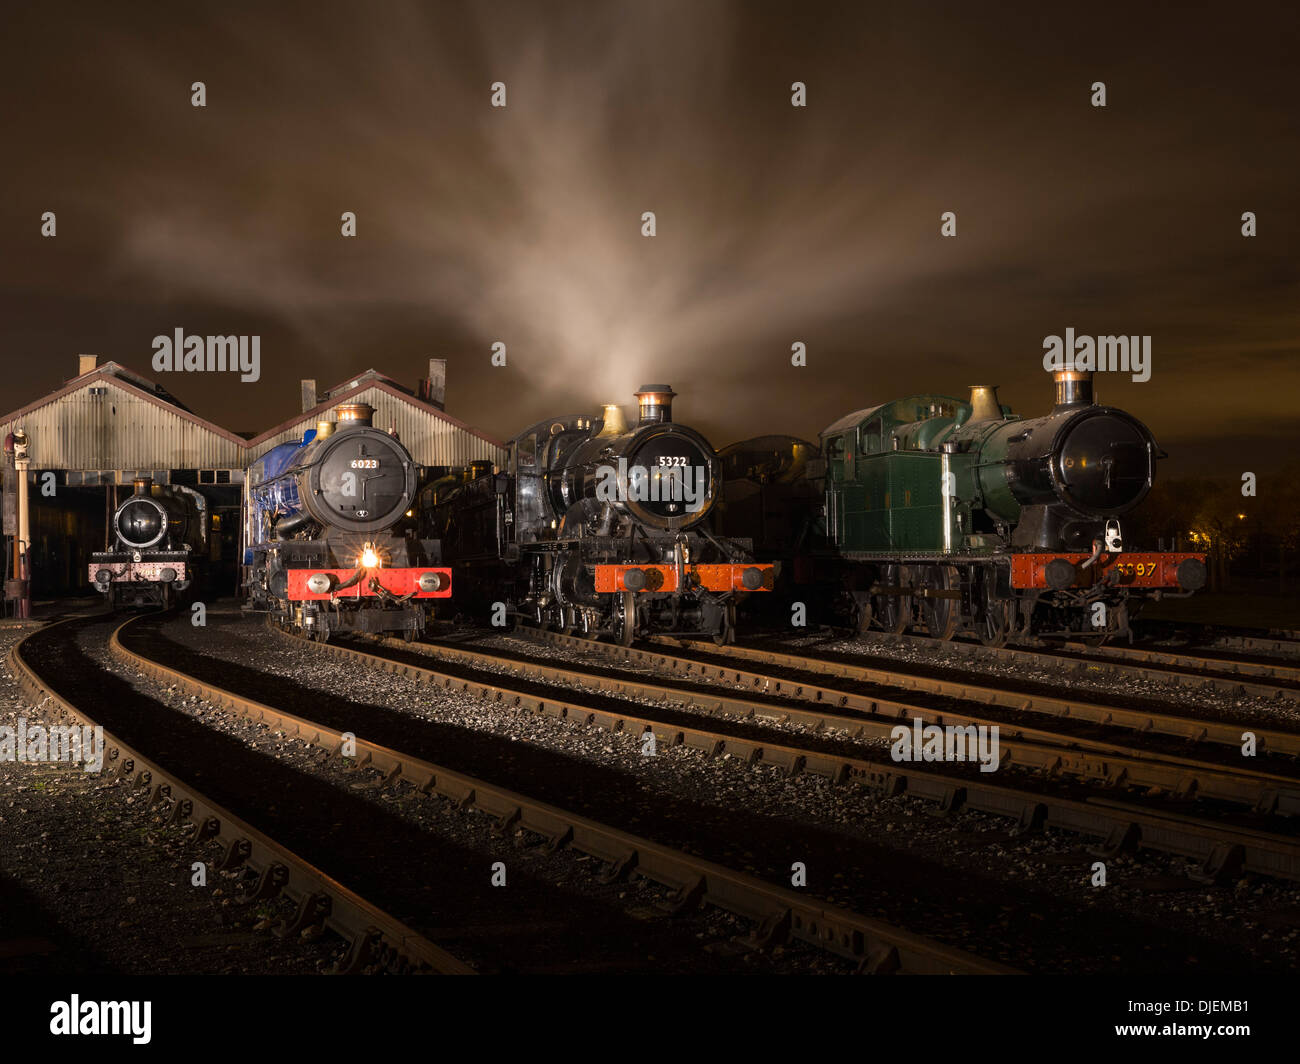 GWR  preserved steam locomotives 6023 'King Edward II', 43xx Class 2-6-0 5322 & Collett 5600 Class 0-6-2T 6697 on shed at night Stock Photo